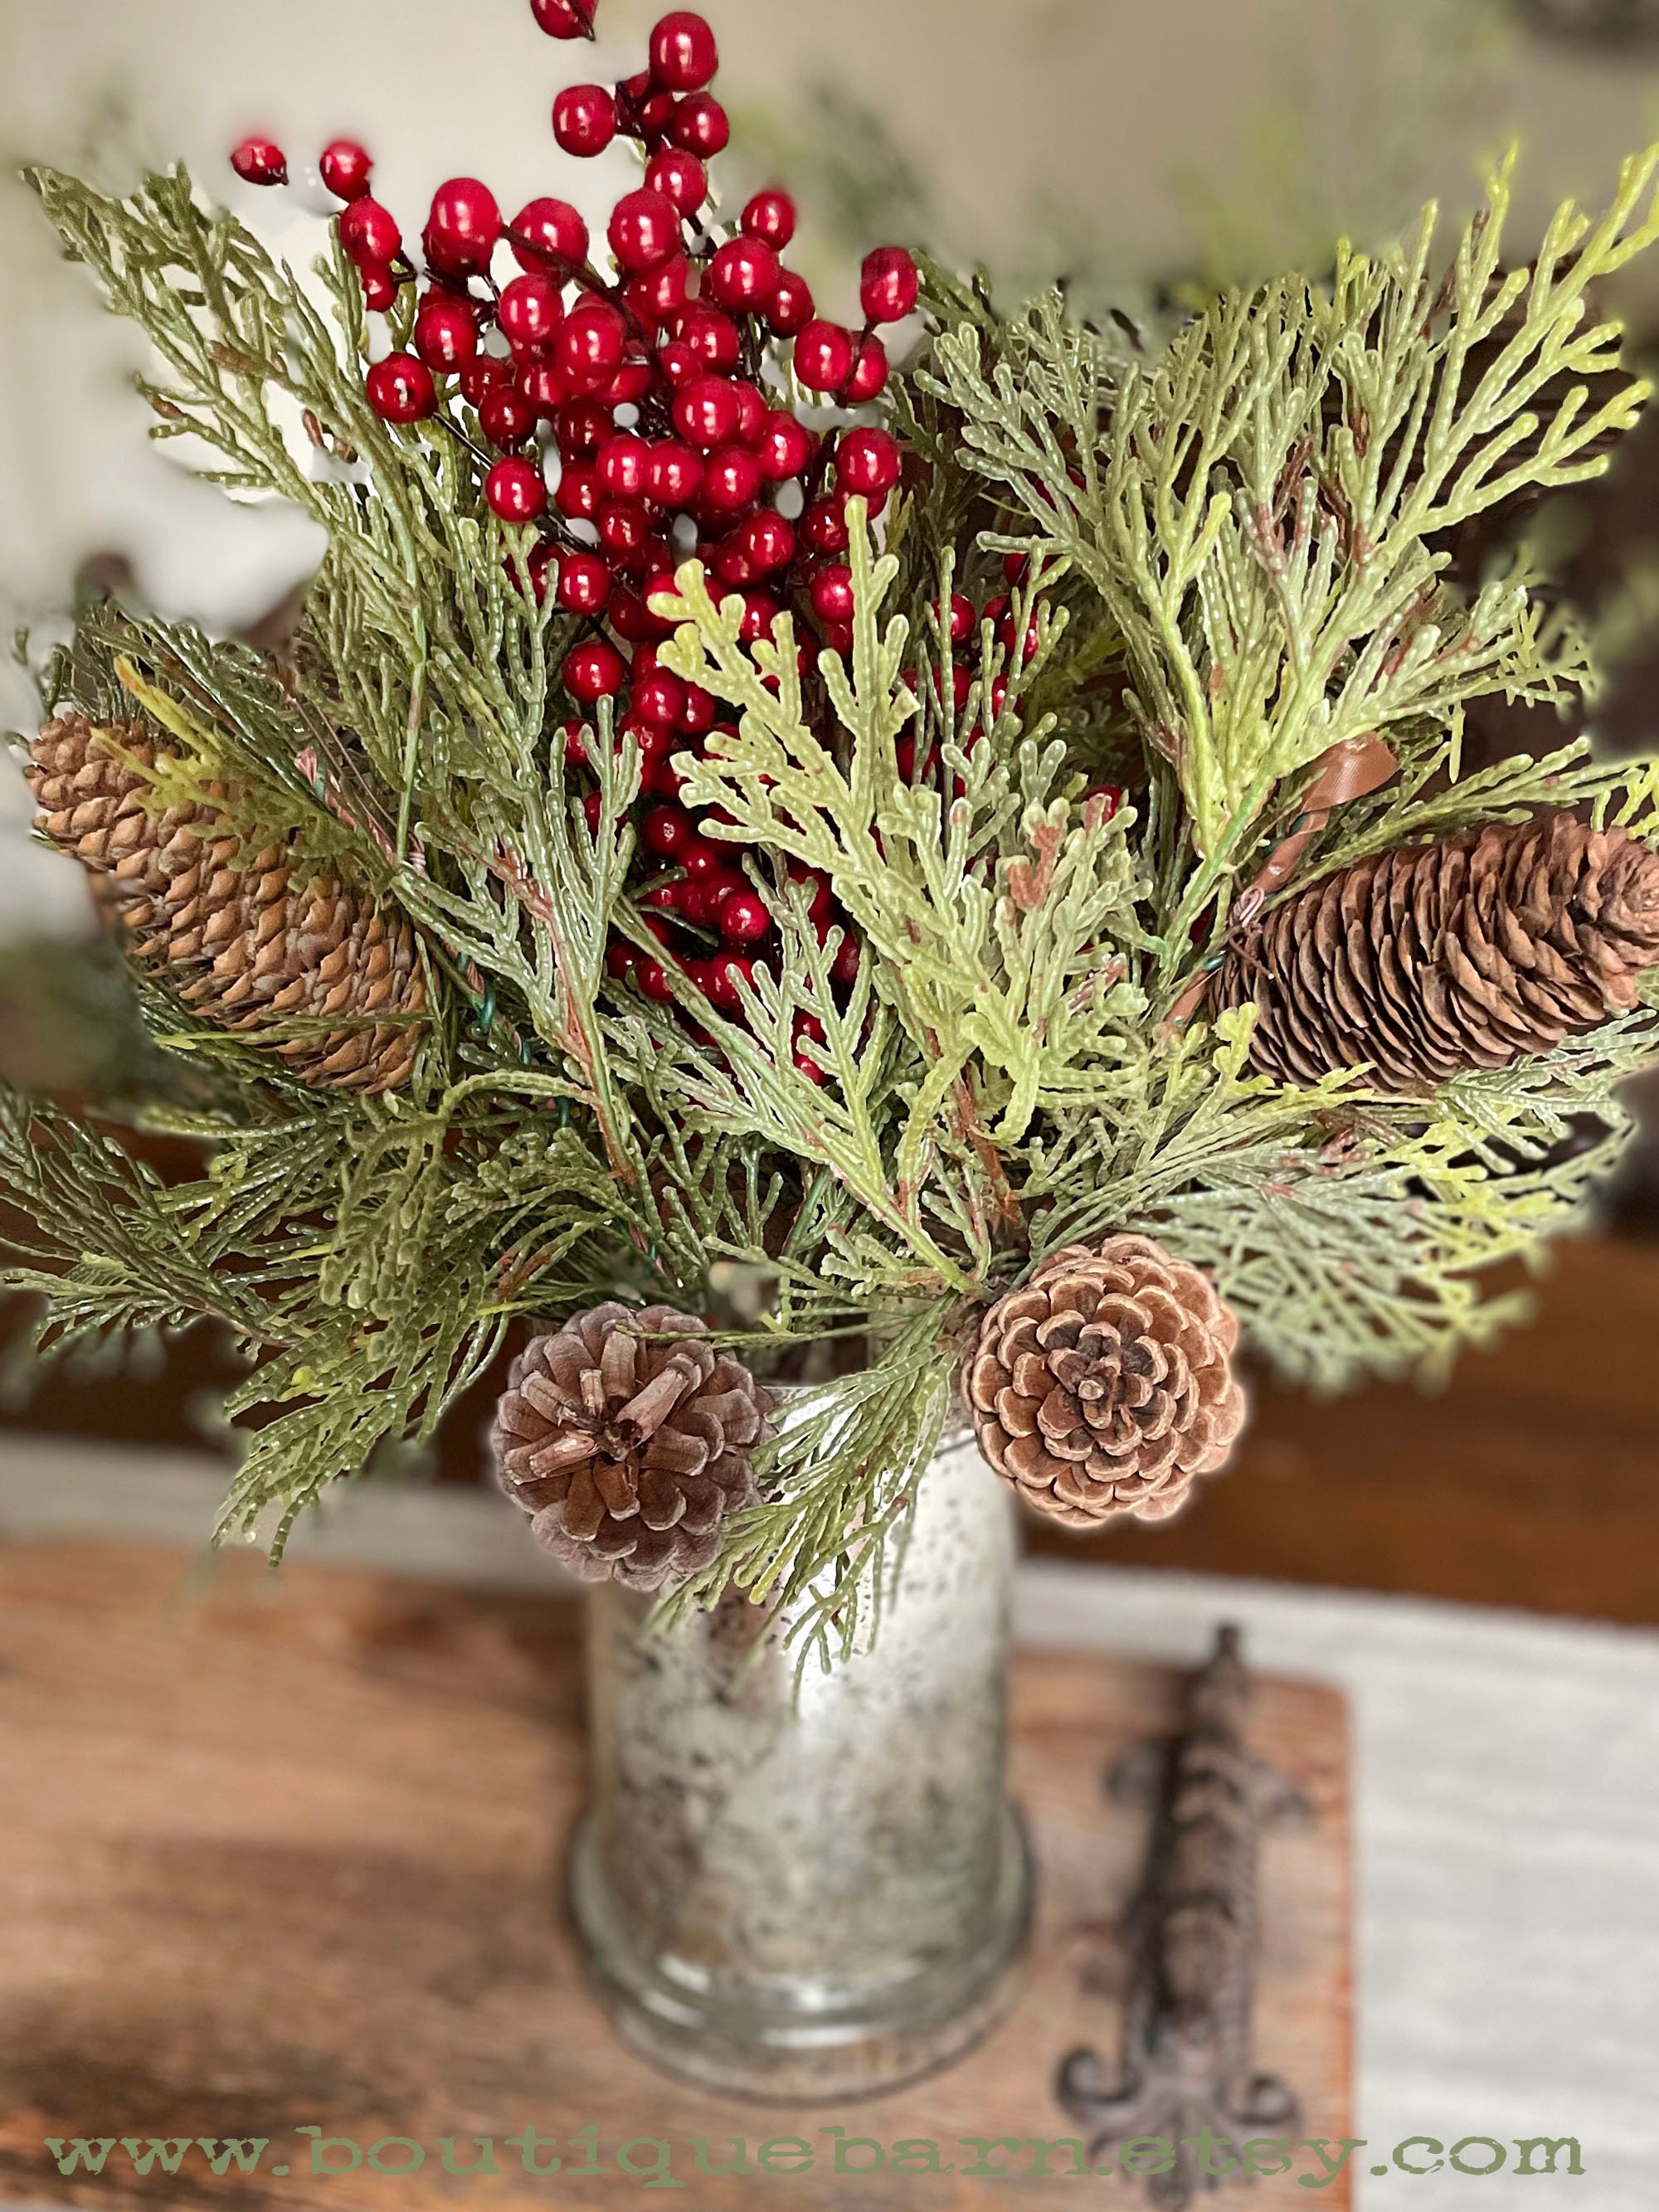 Christmas Tree Branch, Fraser Fir Pine Spray, Artificial Winter Greenery,  Flower Arrangement, Faux Greenery, Pine Branches for Vase 